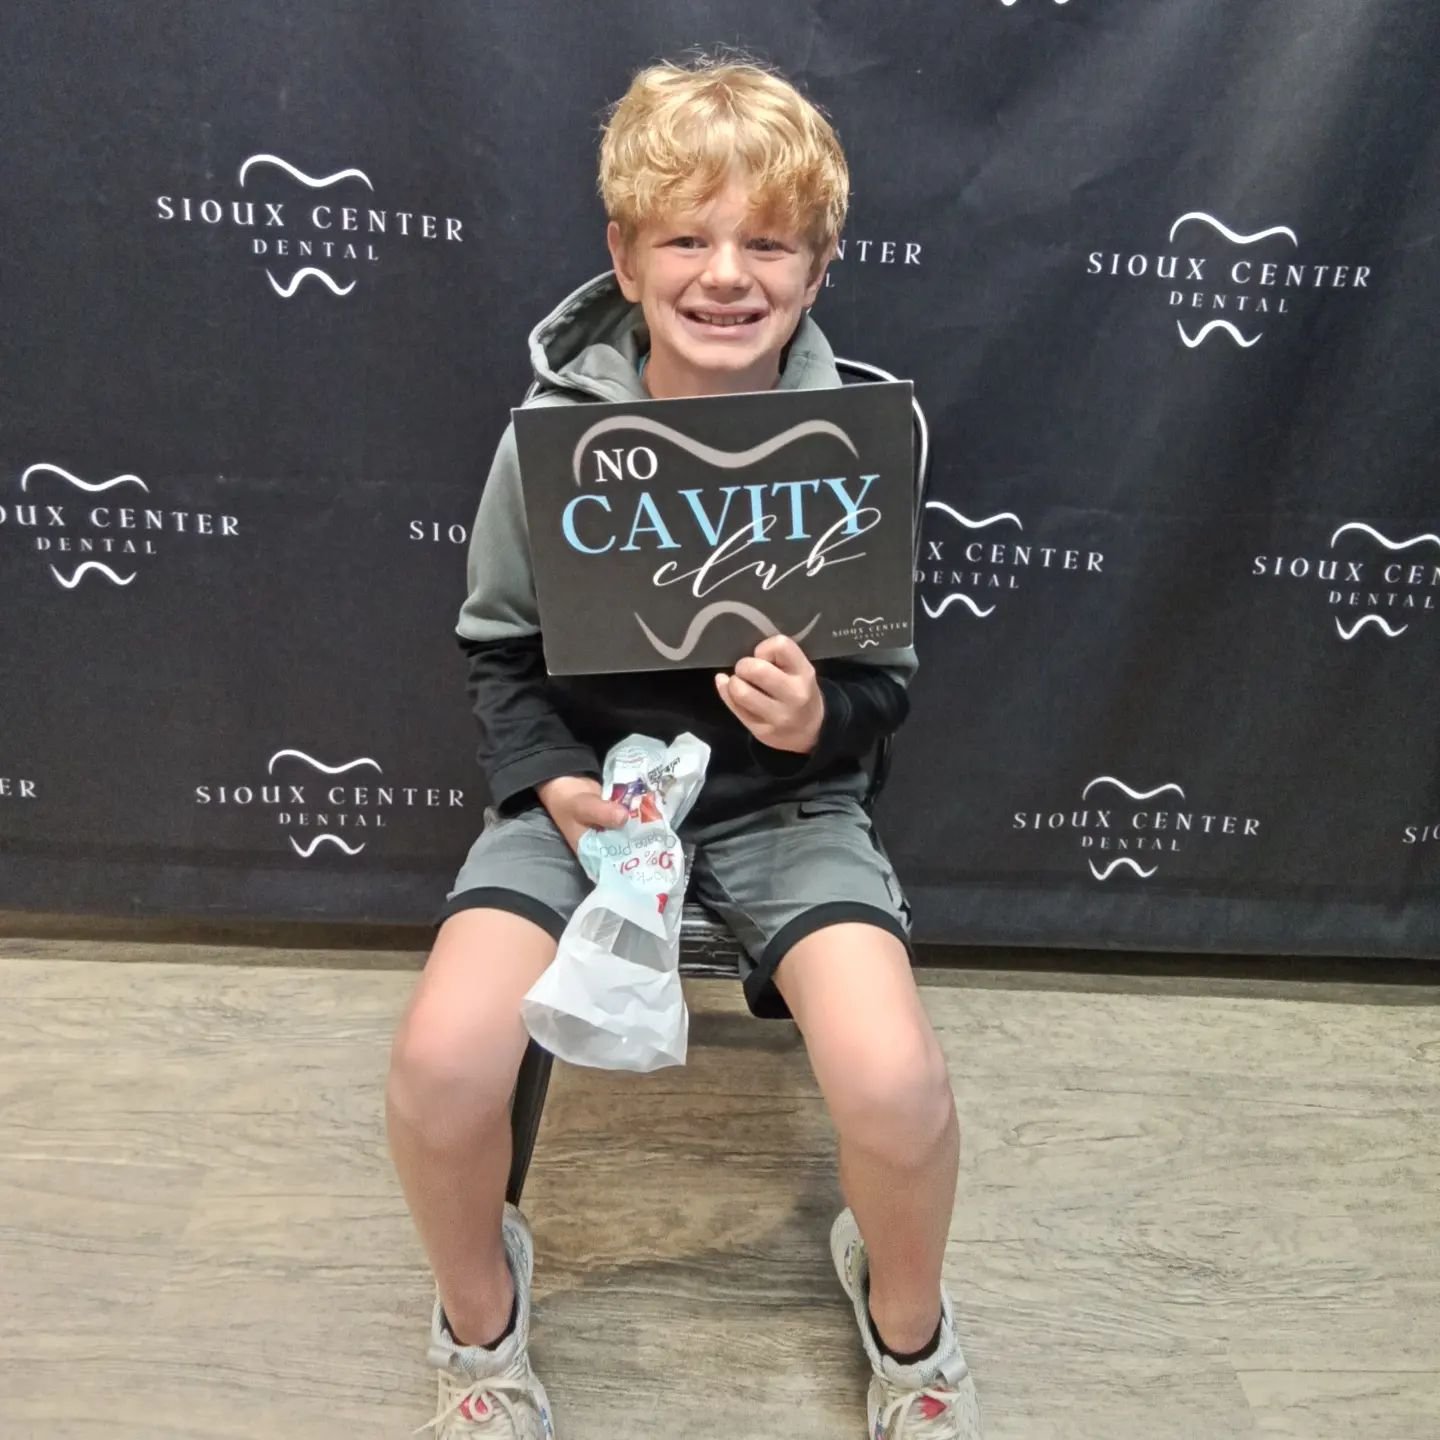 Here's our recent ✨️No Cavity Club✨️ kids! Congrats to Huxton, Izaac, Josiah, and Jordyn on having great checkups! Keep up the great brushing, everyone! 🦷🪥😁
.
.
.
#siouxcenterdental 
#faithfamilyservice 
#generaldentist 
#nocavityclub 
#siouxcente